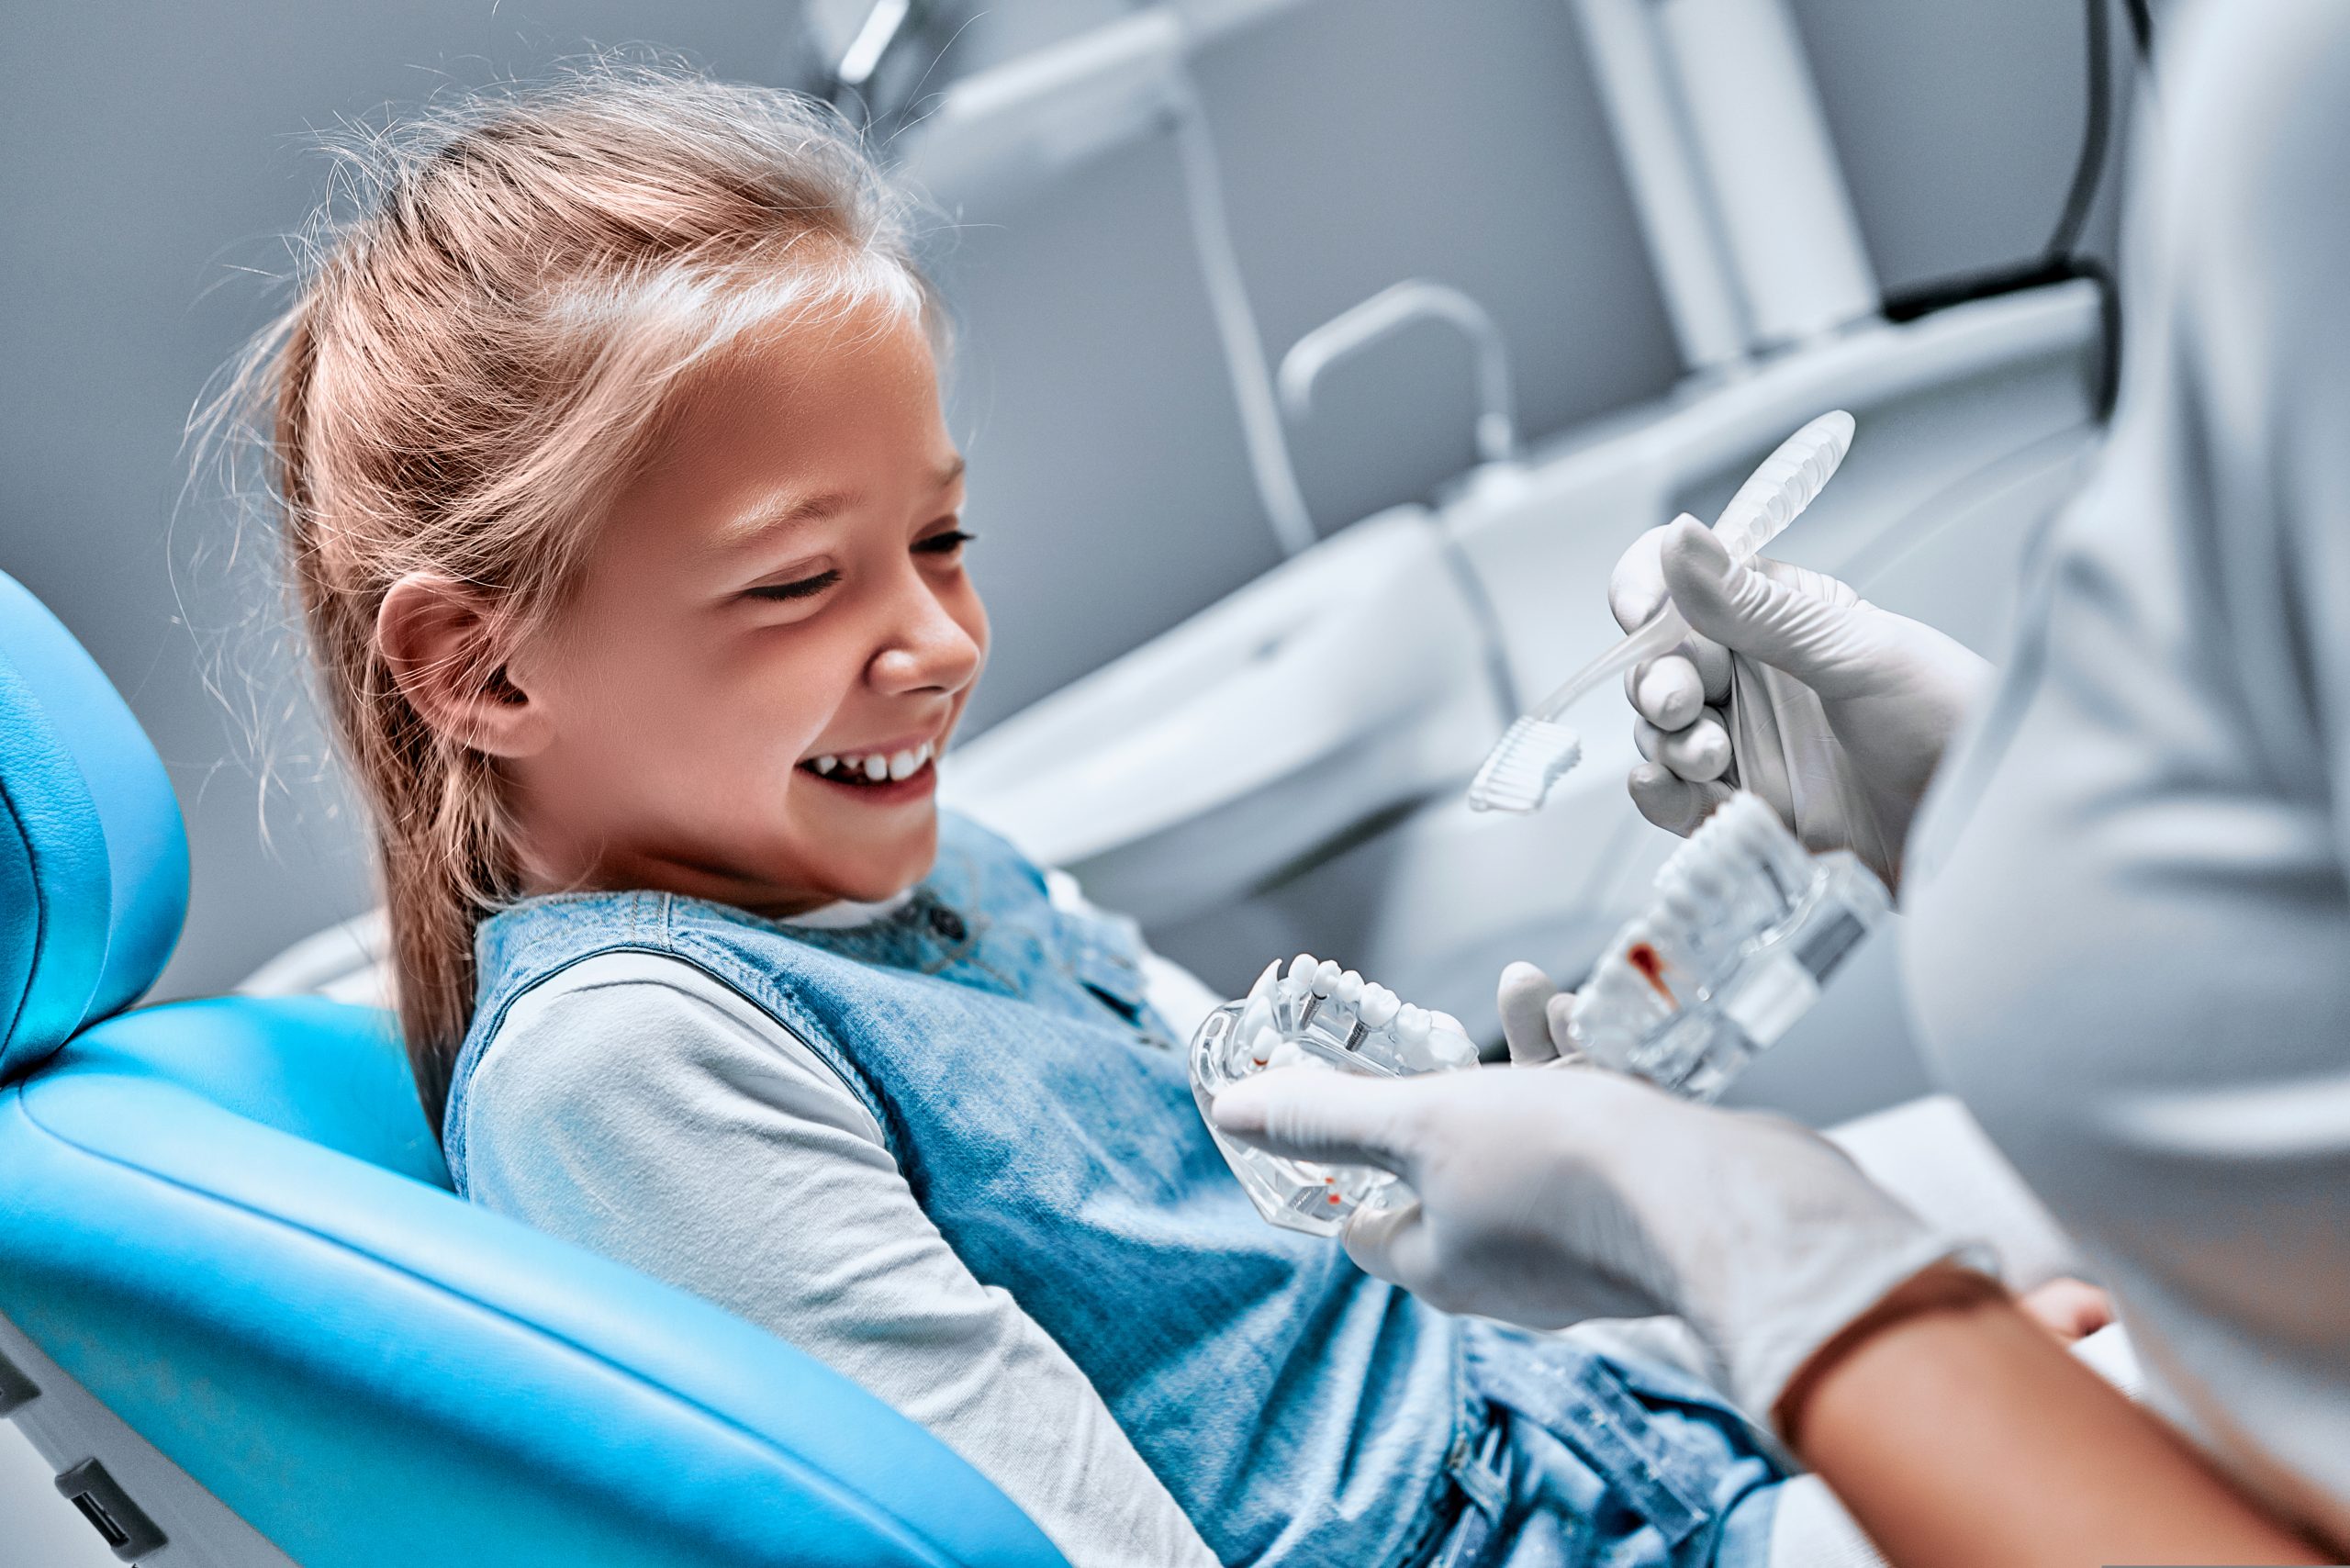 Good Dentistry Starts With Children’s Teeth